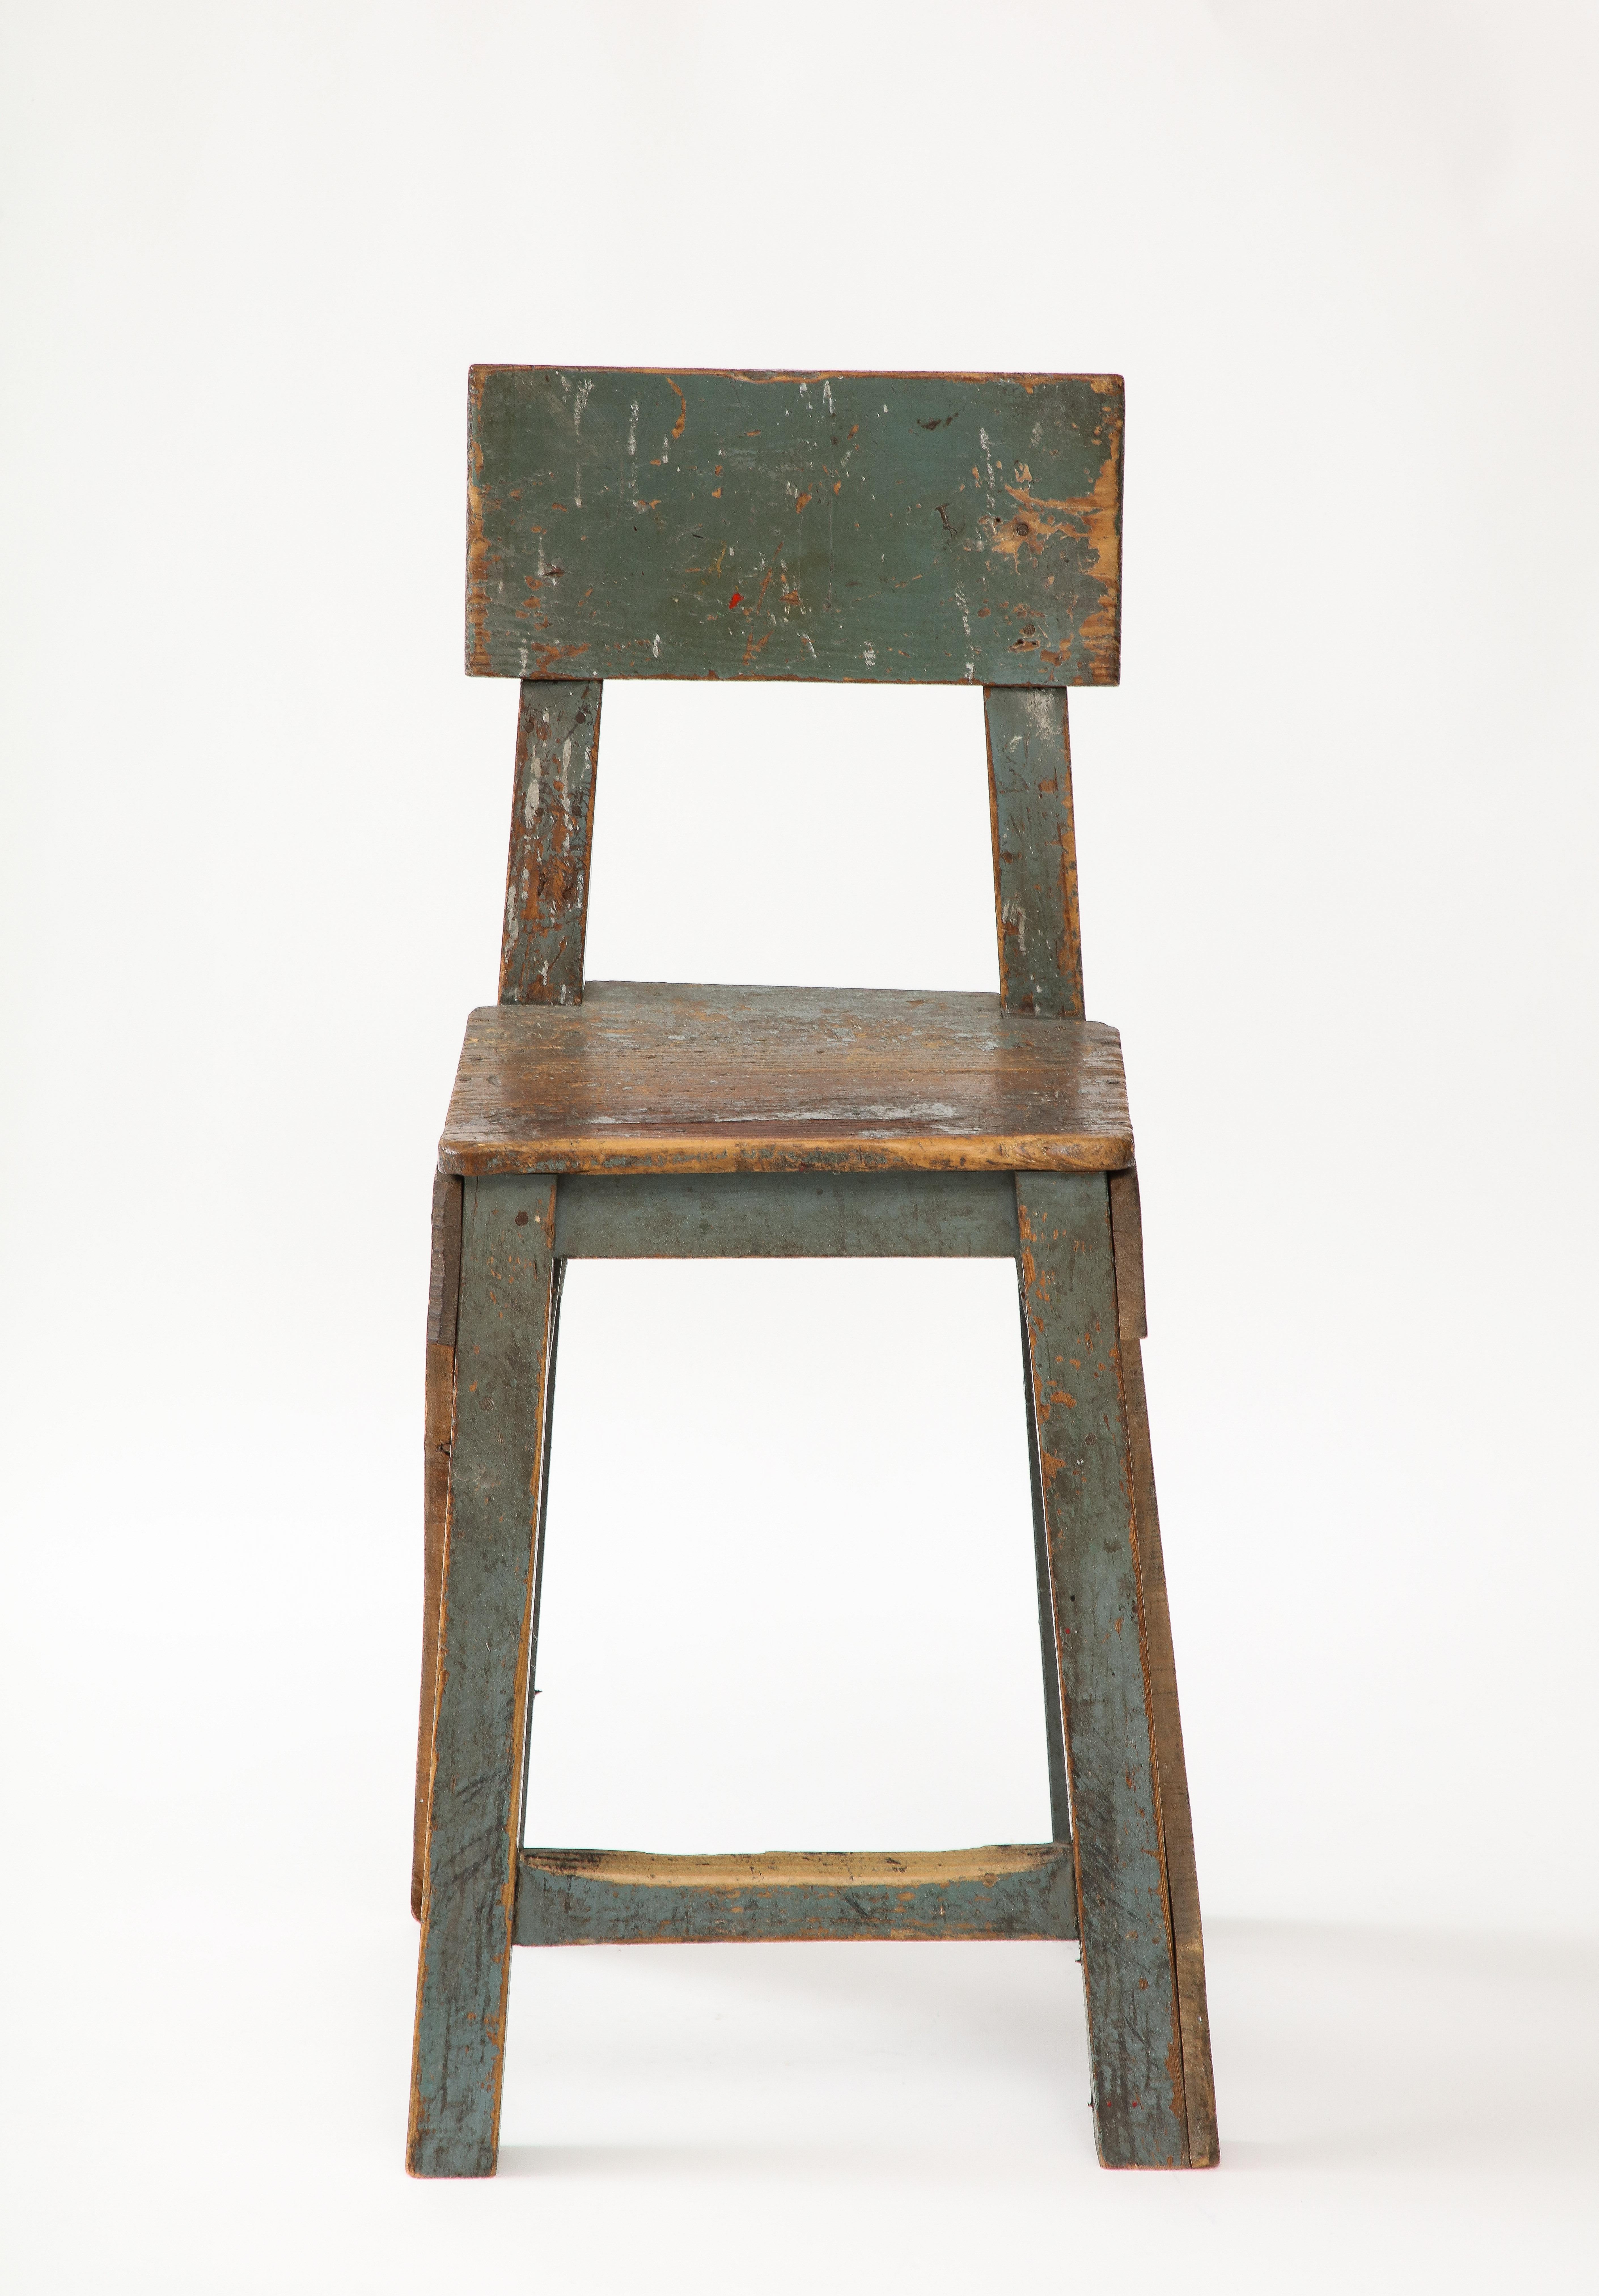 French Primitive Artist’s Chair, c. 1950
Wood, enamel, Blue/Green/Grey  Red Letters